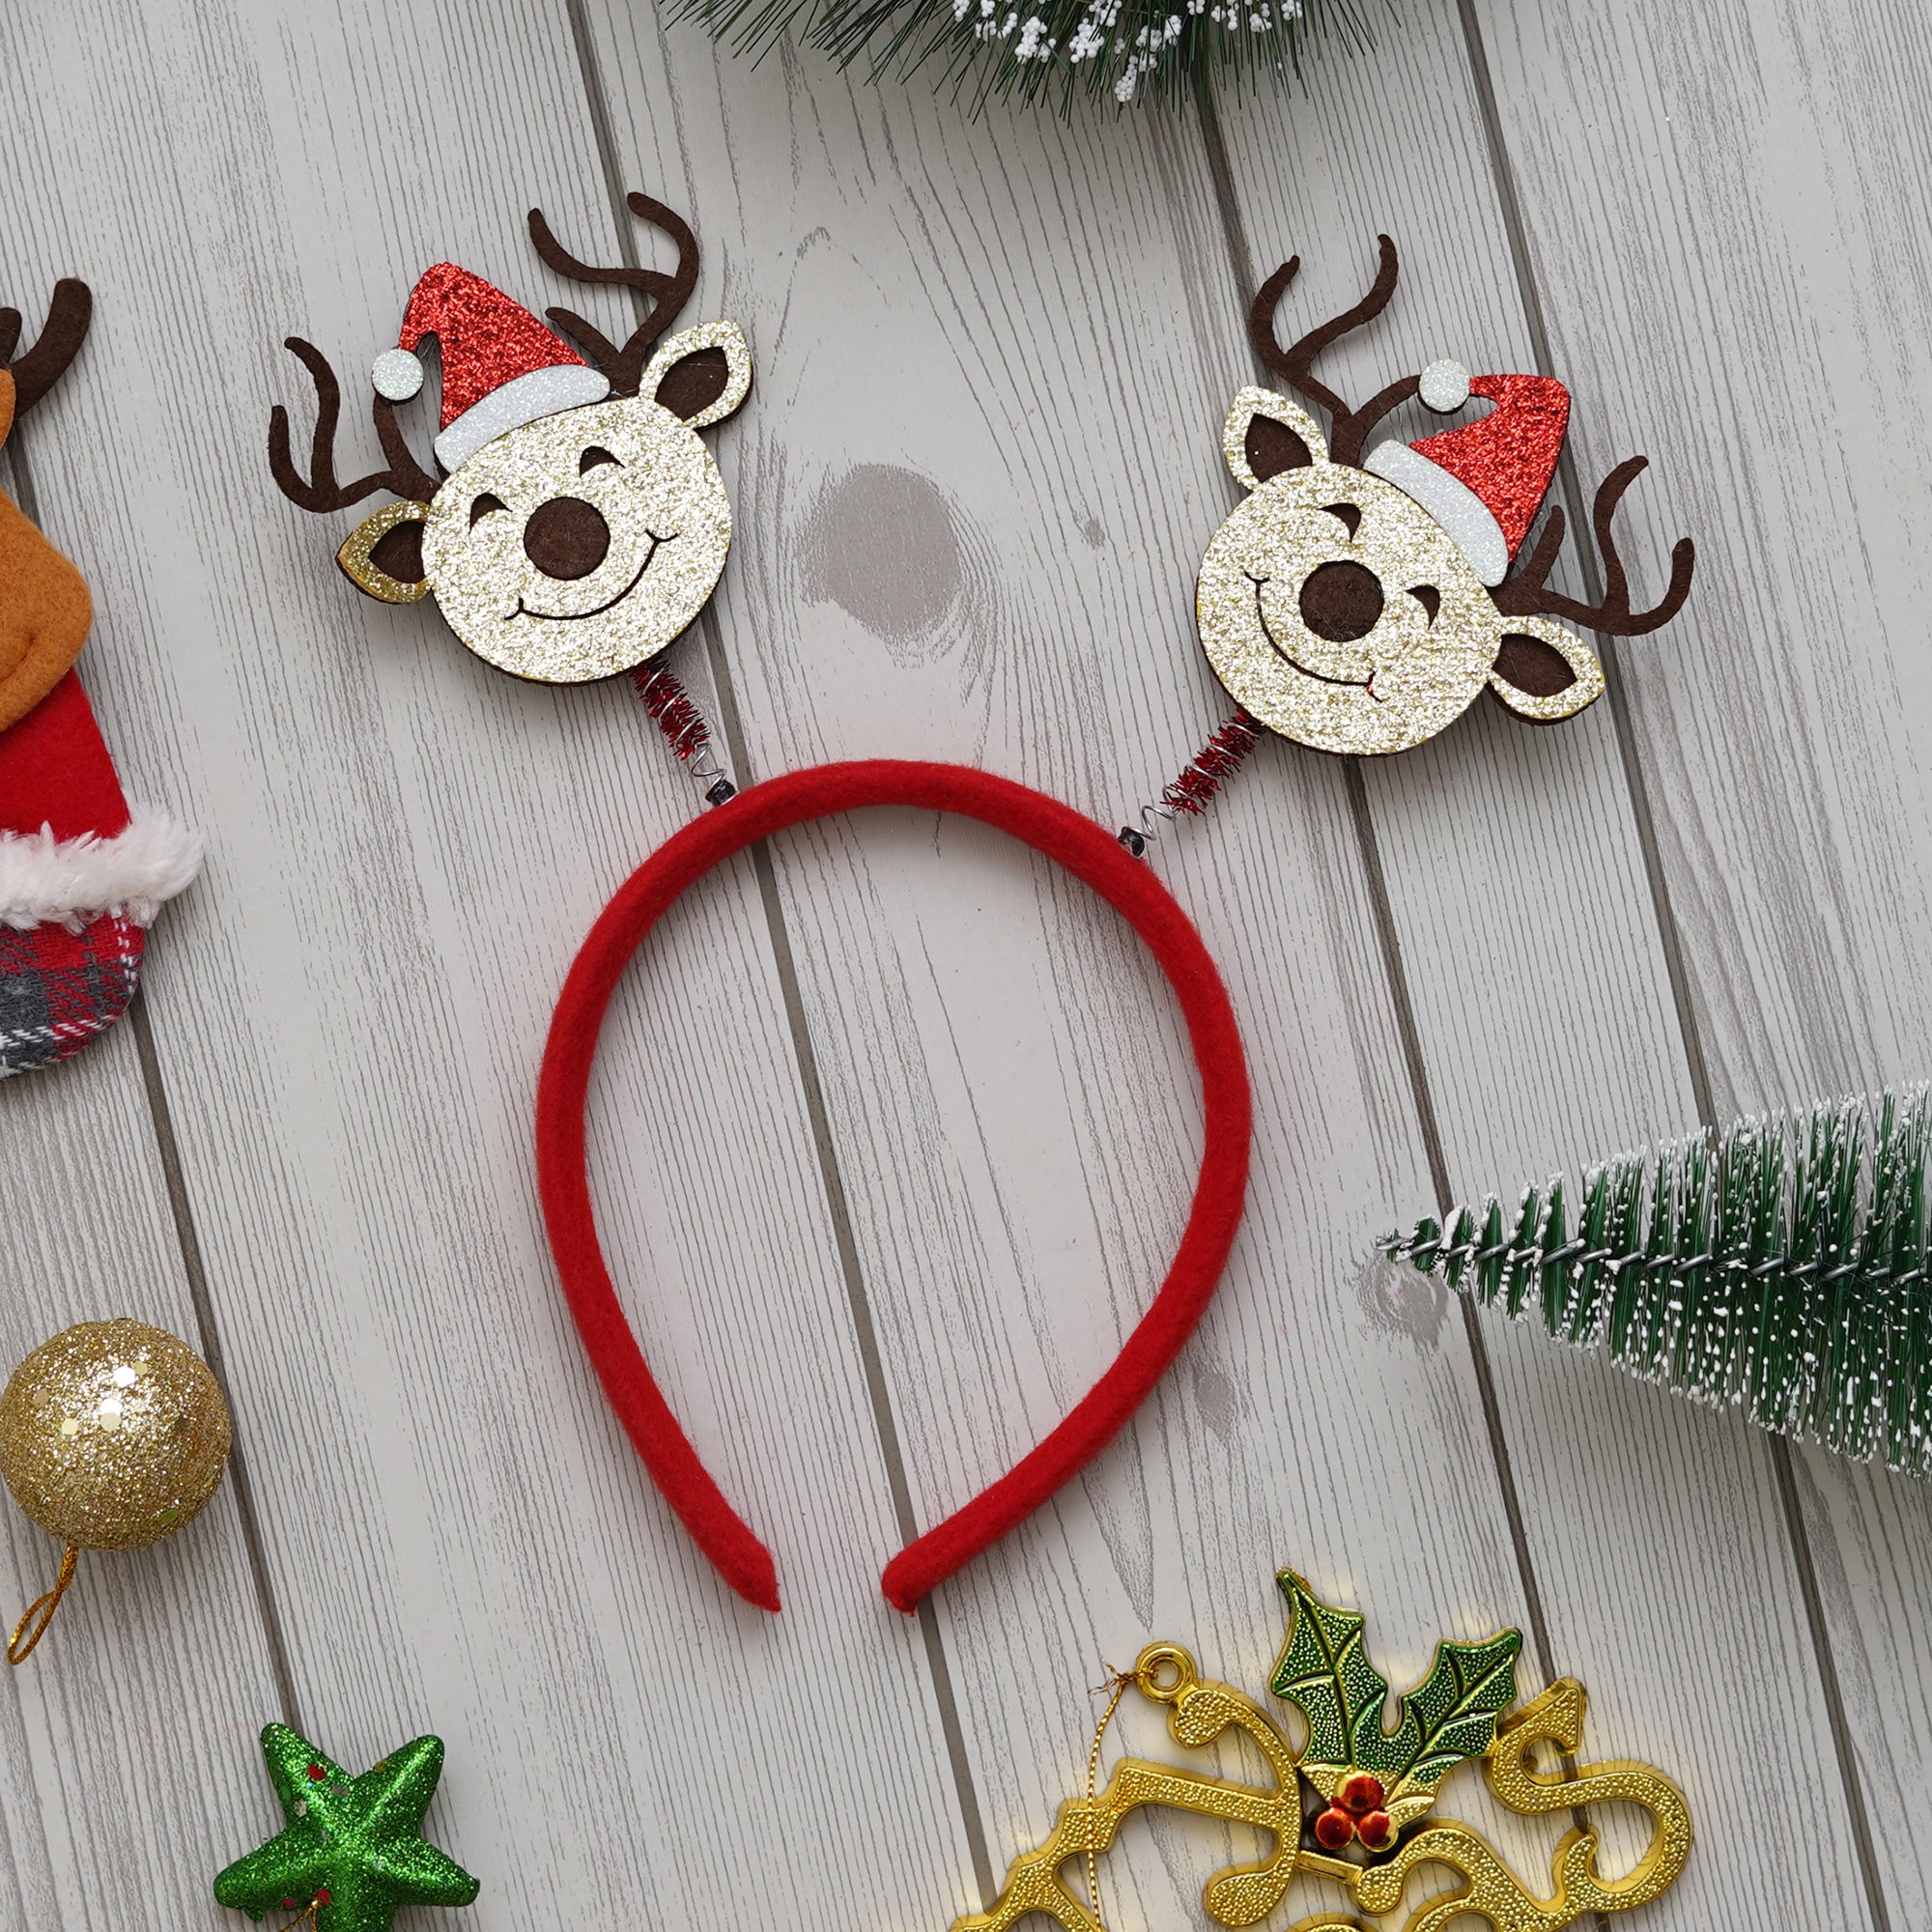 eCraftIndia Christmas Reindeer Design Headband for Christmas and Birthday Parties  Best Gift for Women, Girls, and Kids